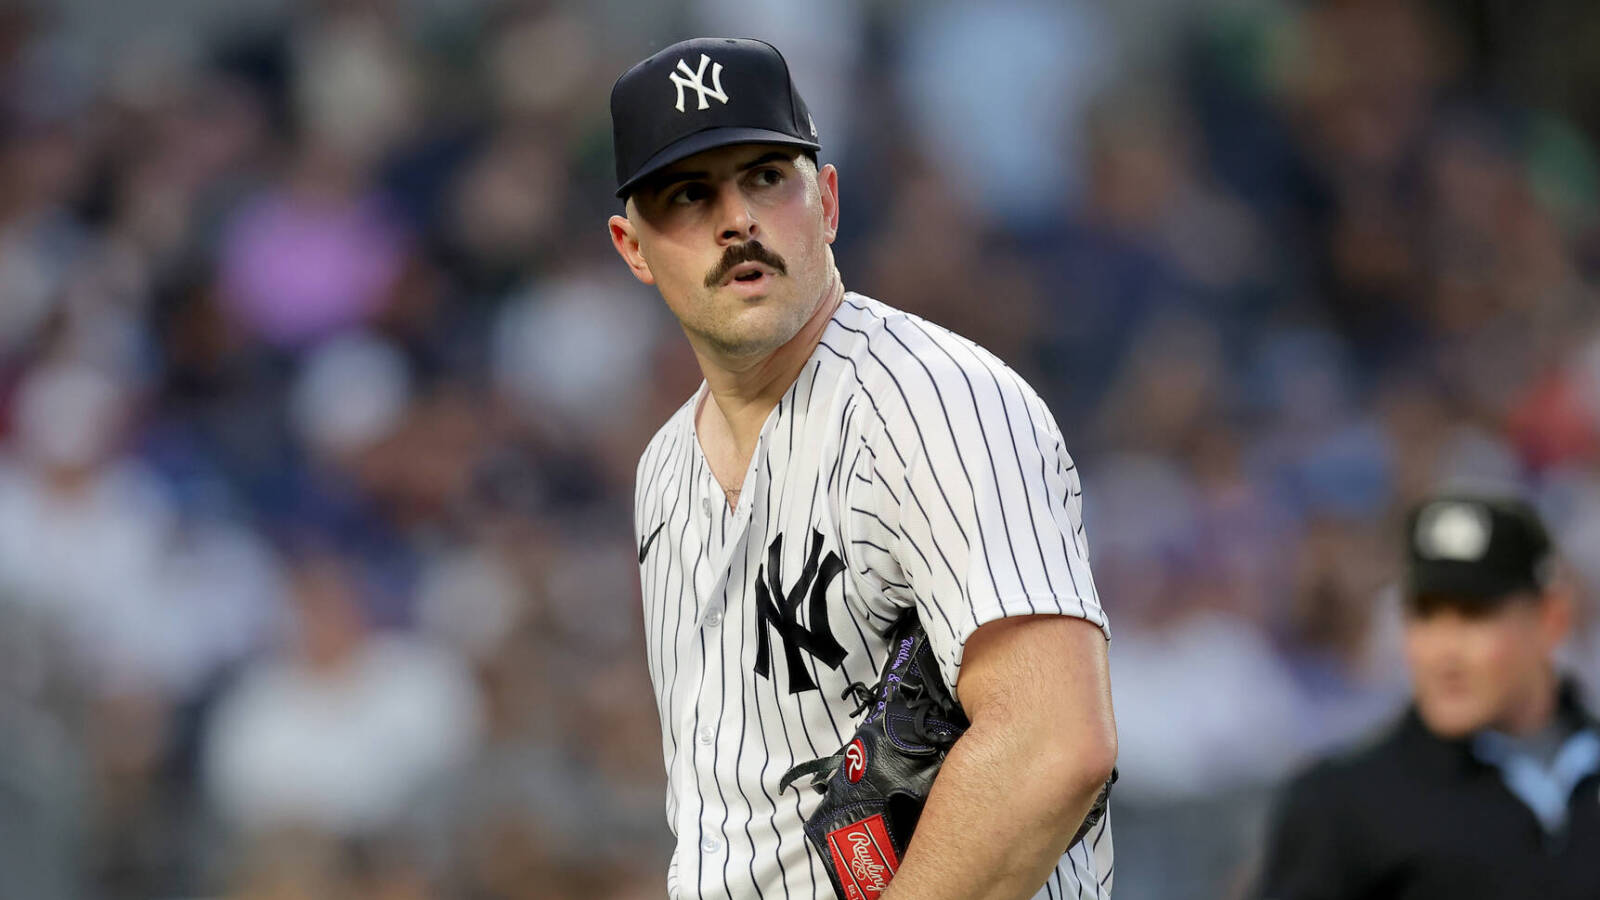 New York Yankees fans excited to have Carlos Rodon as star pitcher